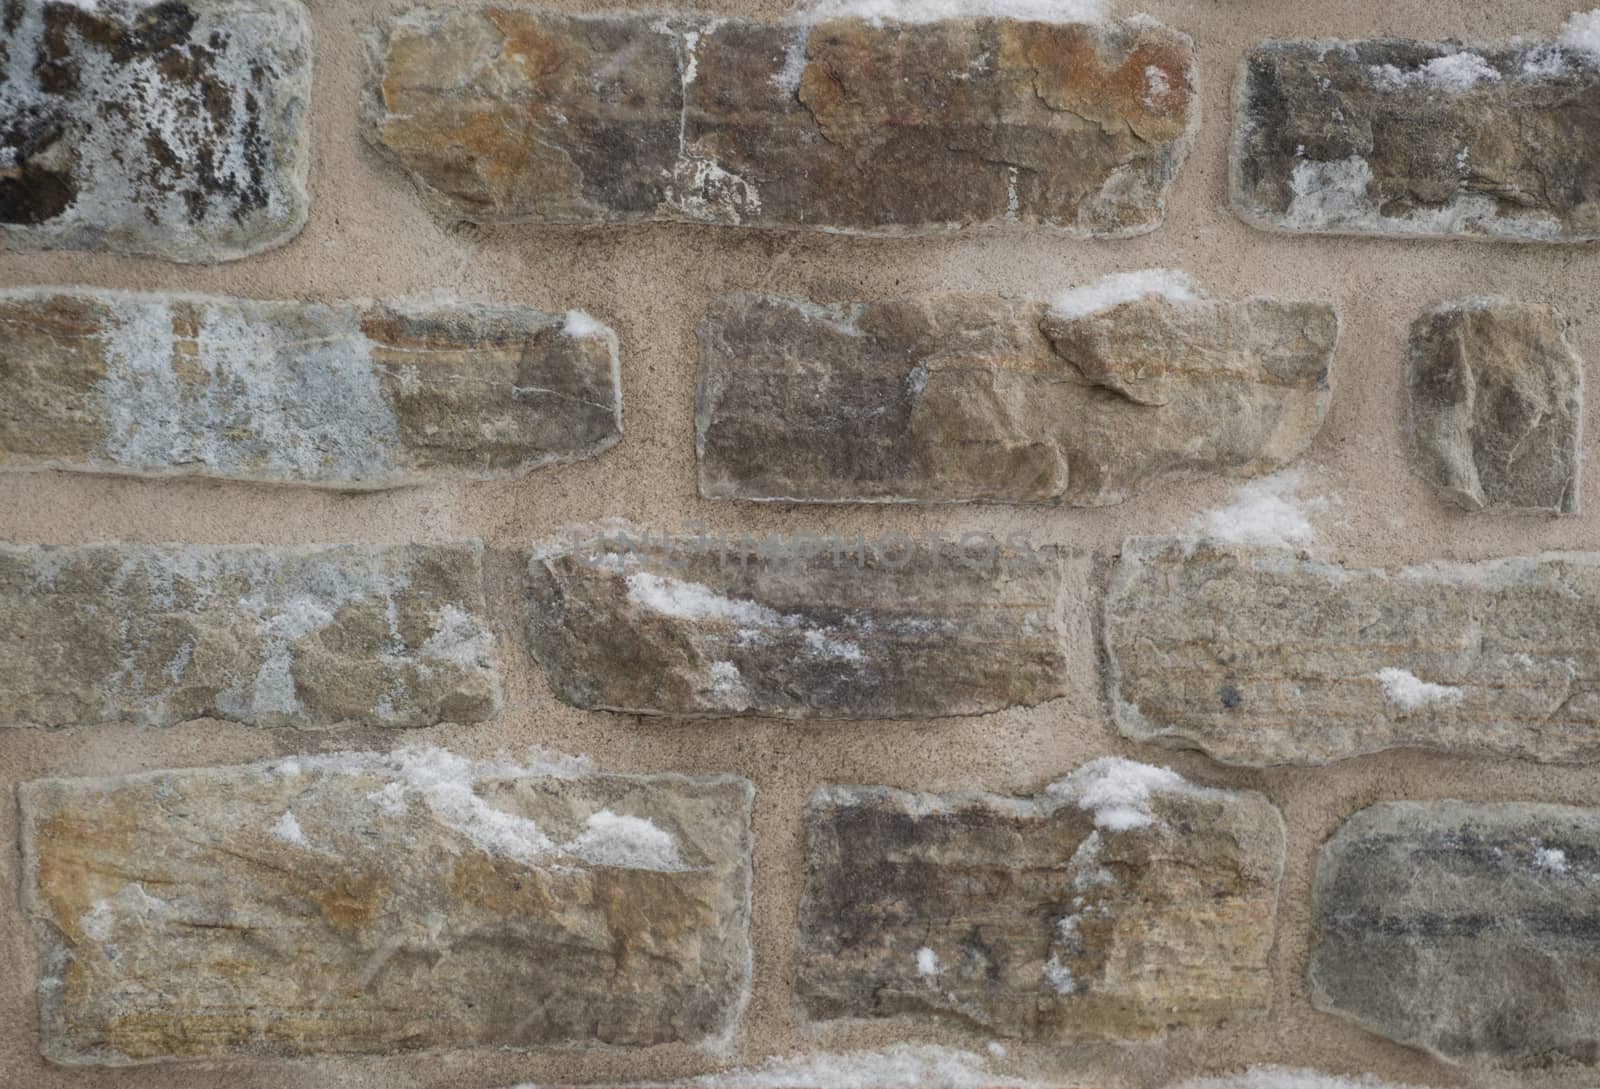 Wintry stone wall background with mortar